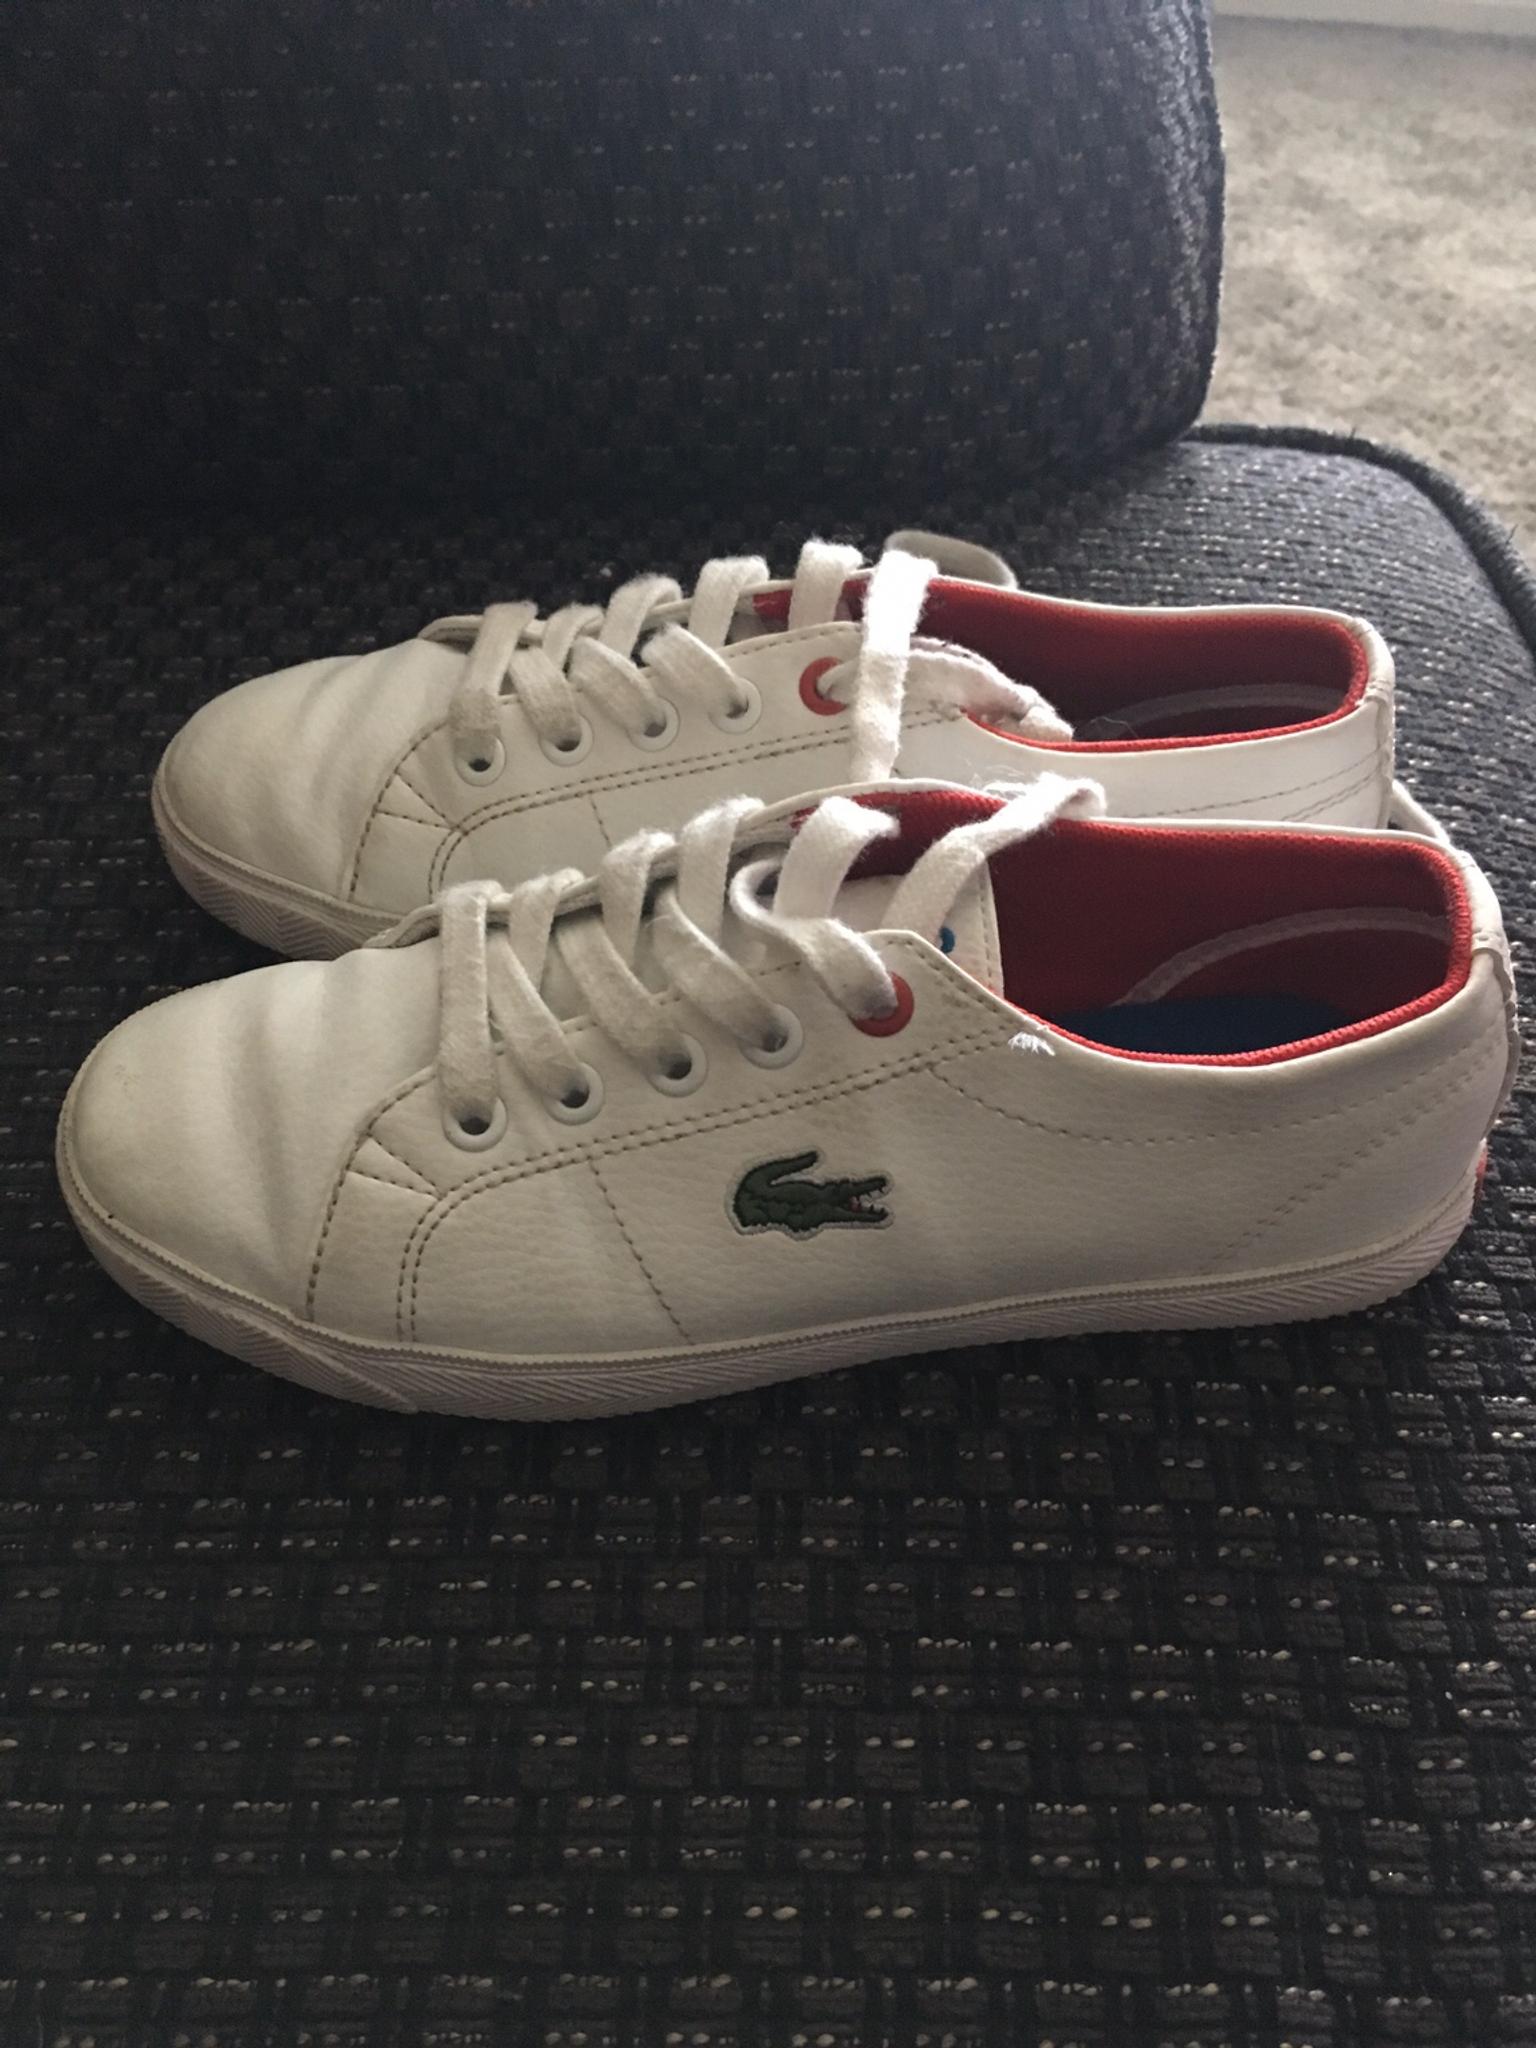 boys lacoste trainers